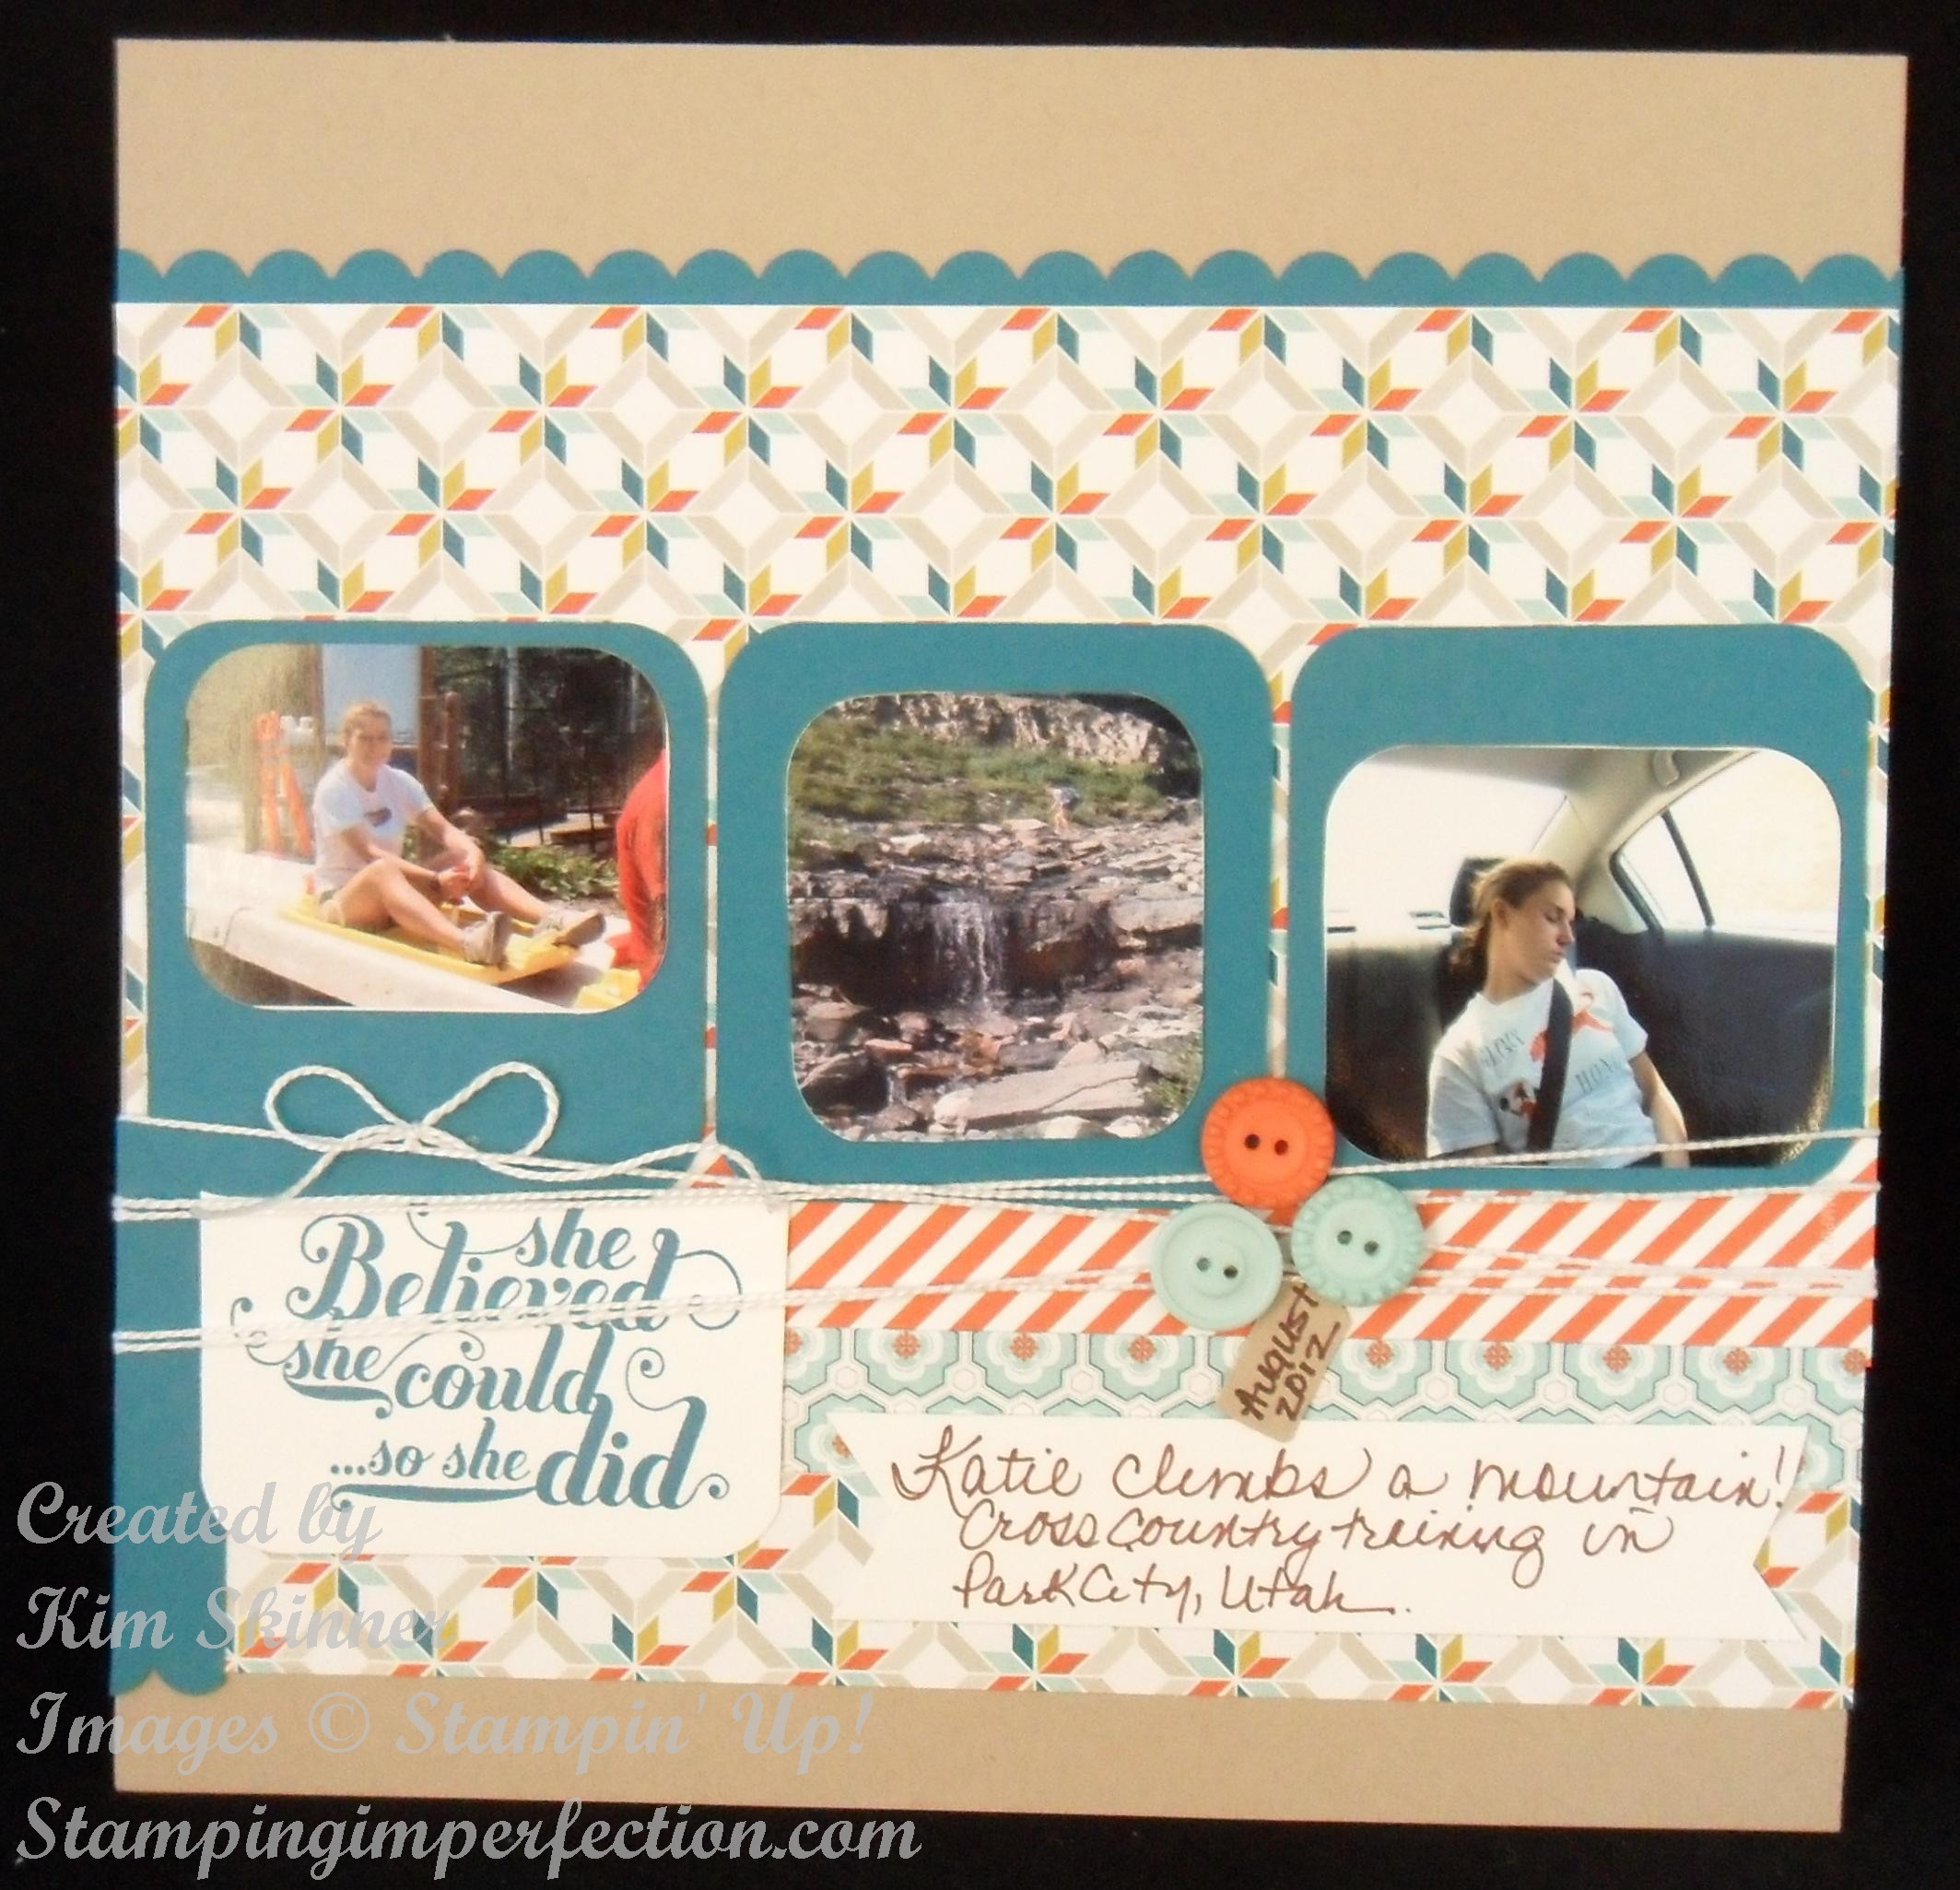 2 Stampin' Up! Scrapbook Pages Made From 1 Sketch! – Stamping